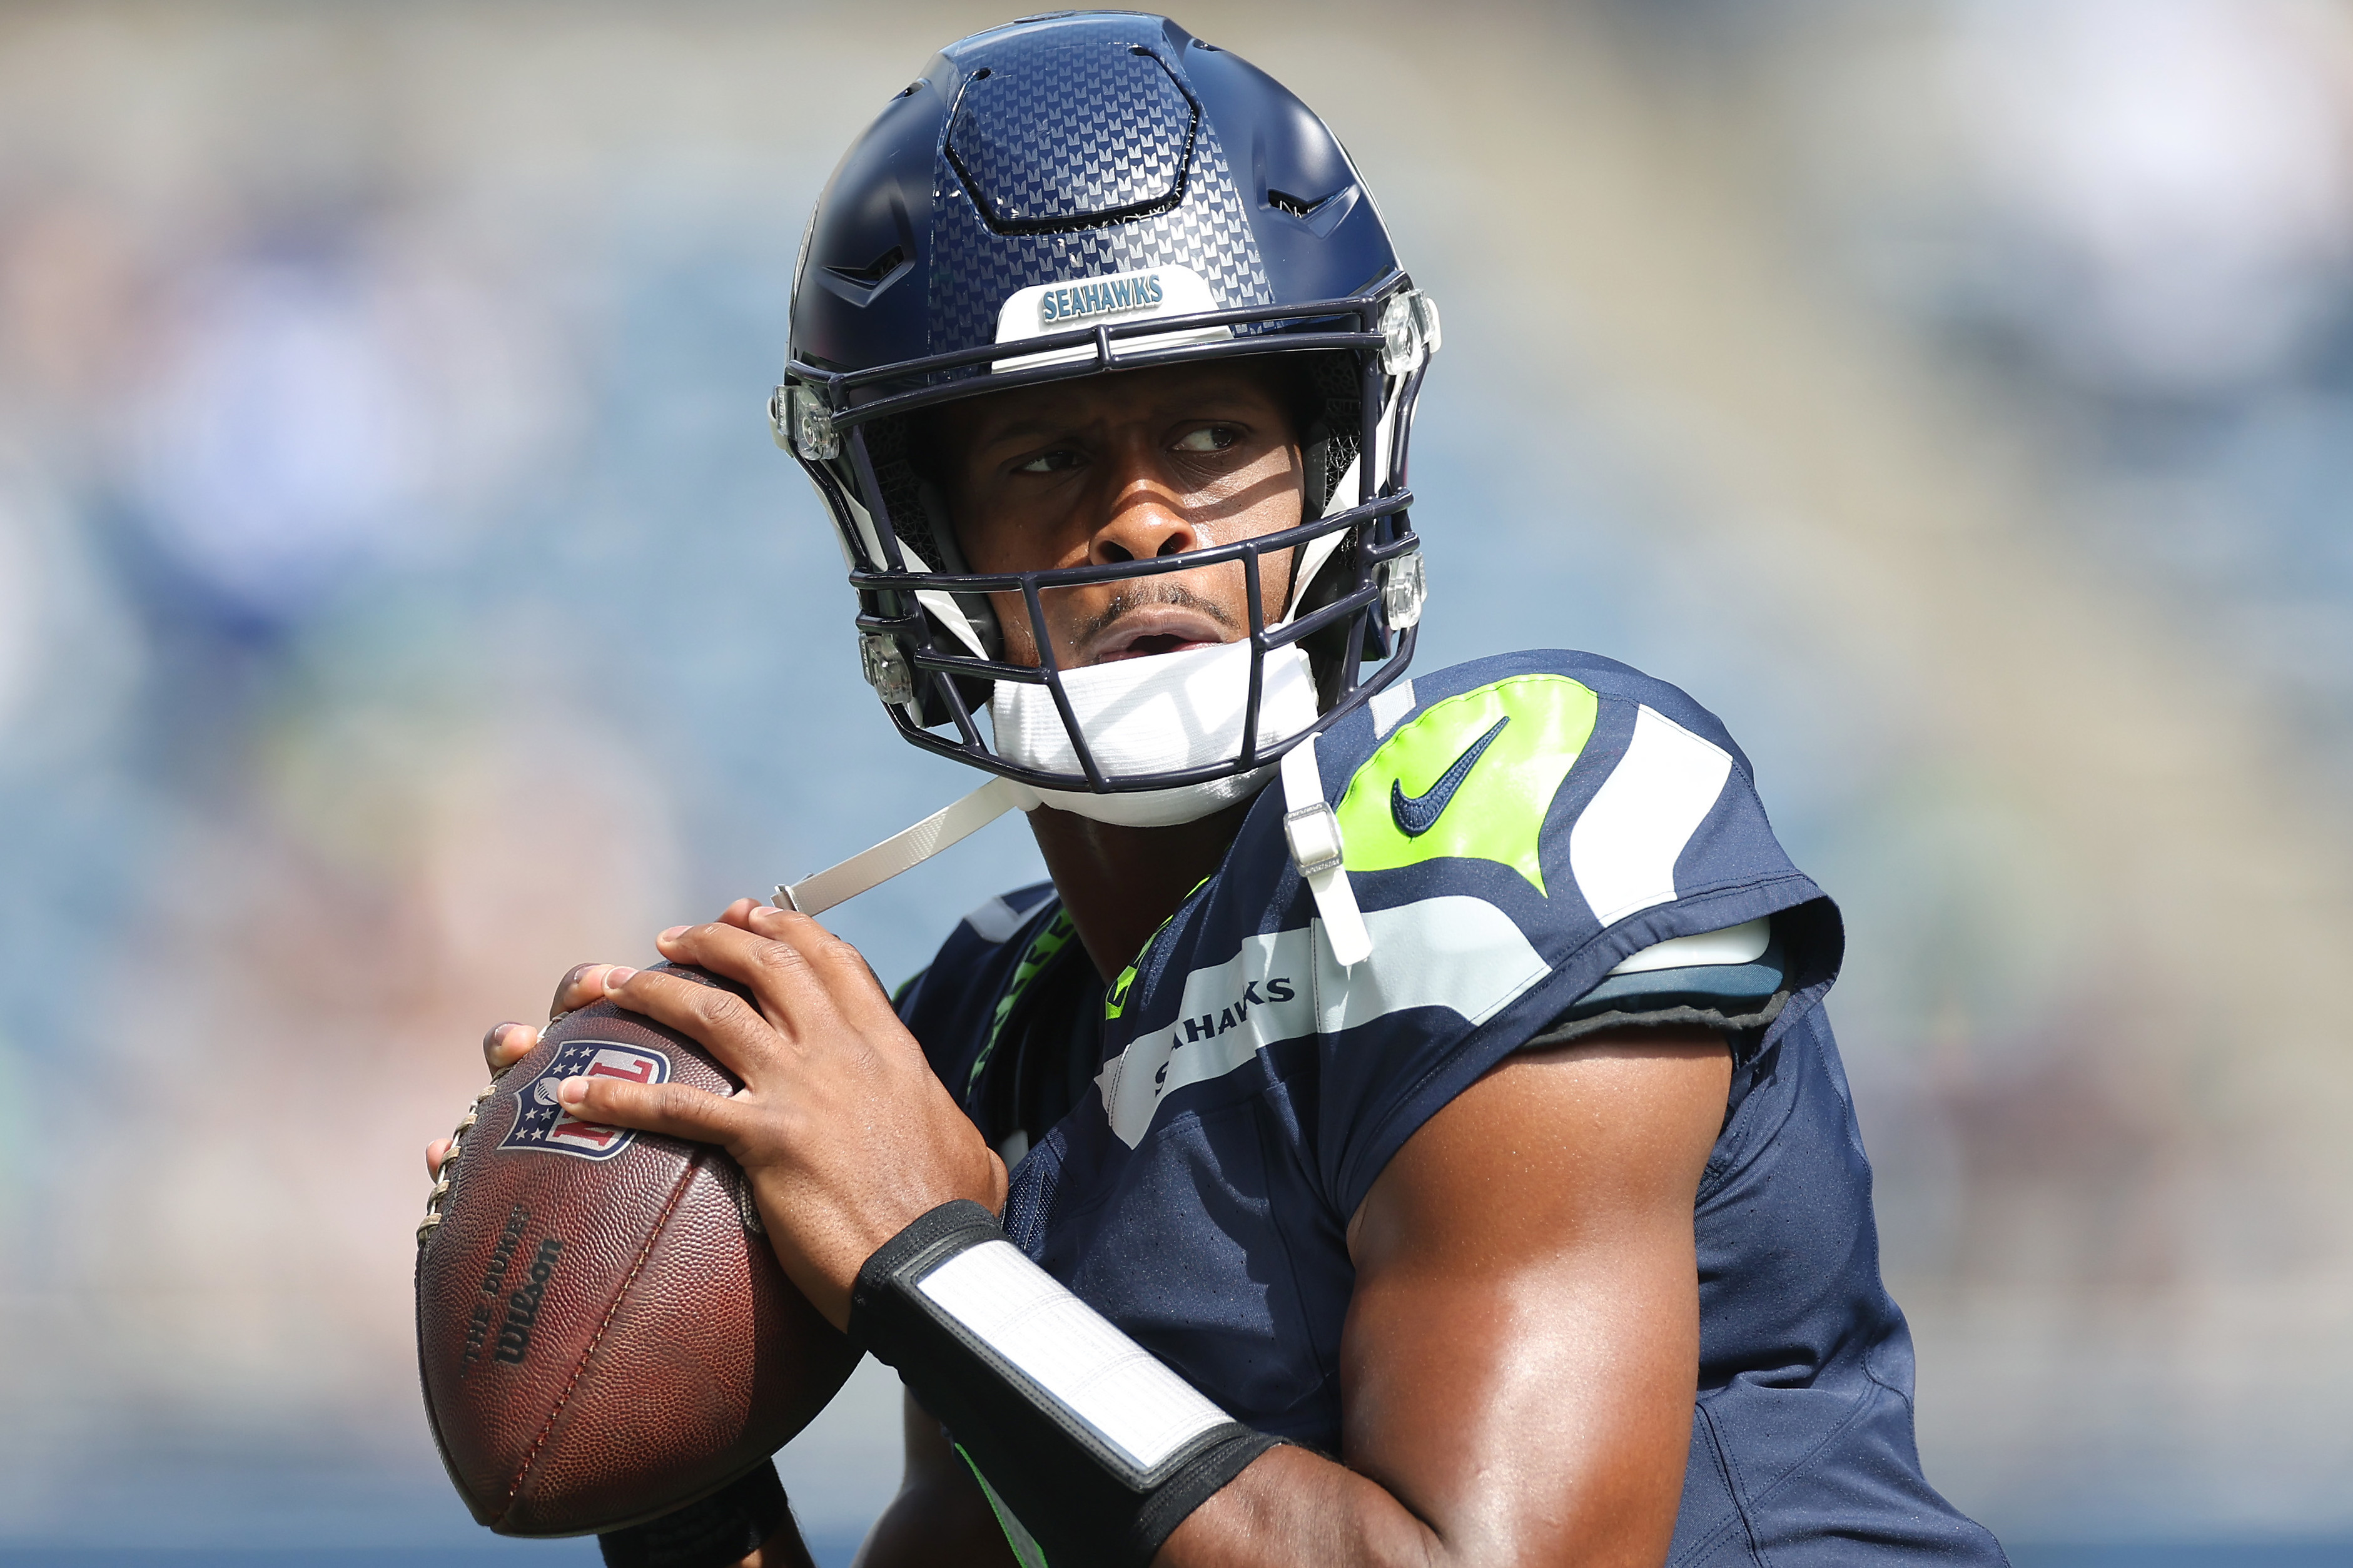 2022 Seattle Seahawks Schedule: Complete schedule, dates, times, television  tv info, match-up information for the 2022 NFL Season